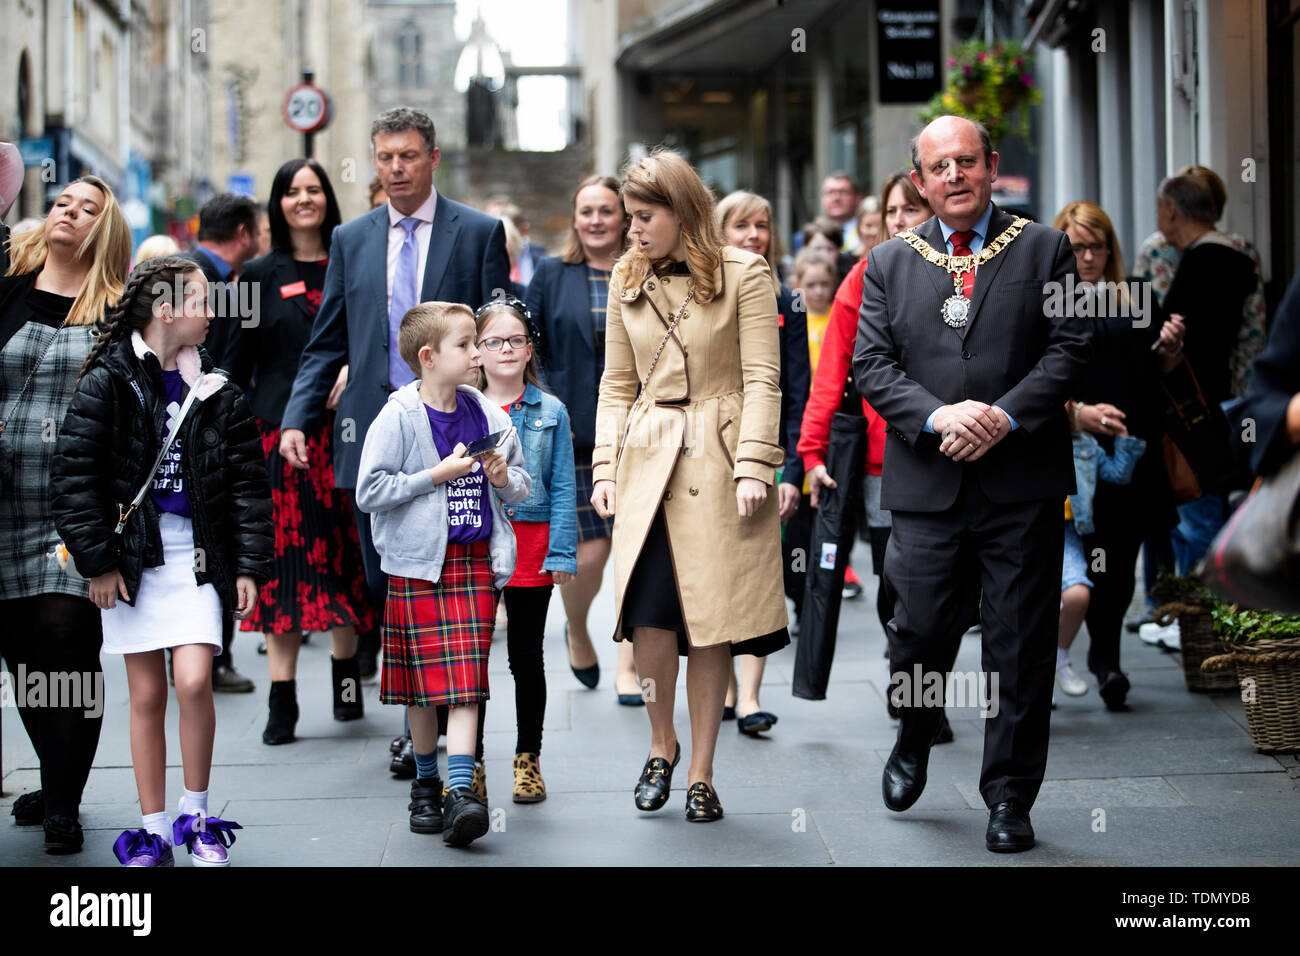 Princess Beatrice walks down Edinburgh's Royal Mile with children from Scotland's children's hospital charities as she takes part on the Oor Wullie's Big Bucket Trail to find one of several life-sized sculptures of the favourite comic book character on a public art trail in the city. Stock Photo